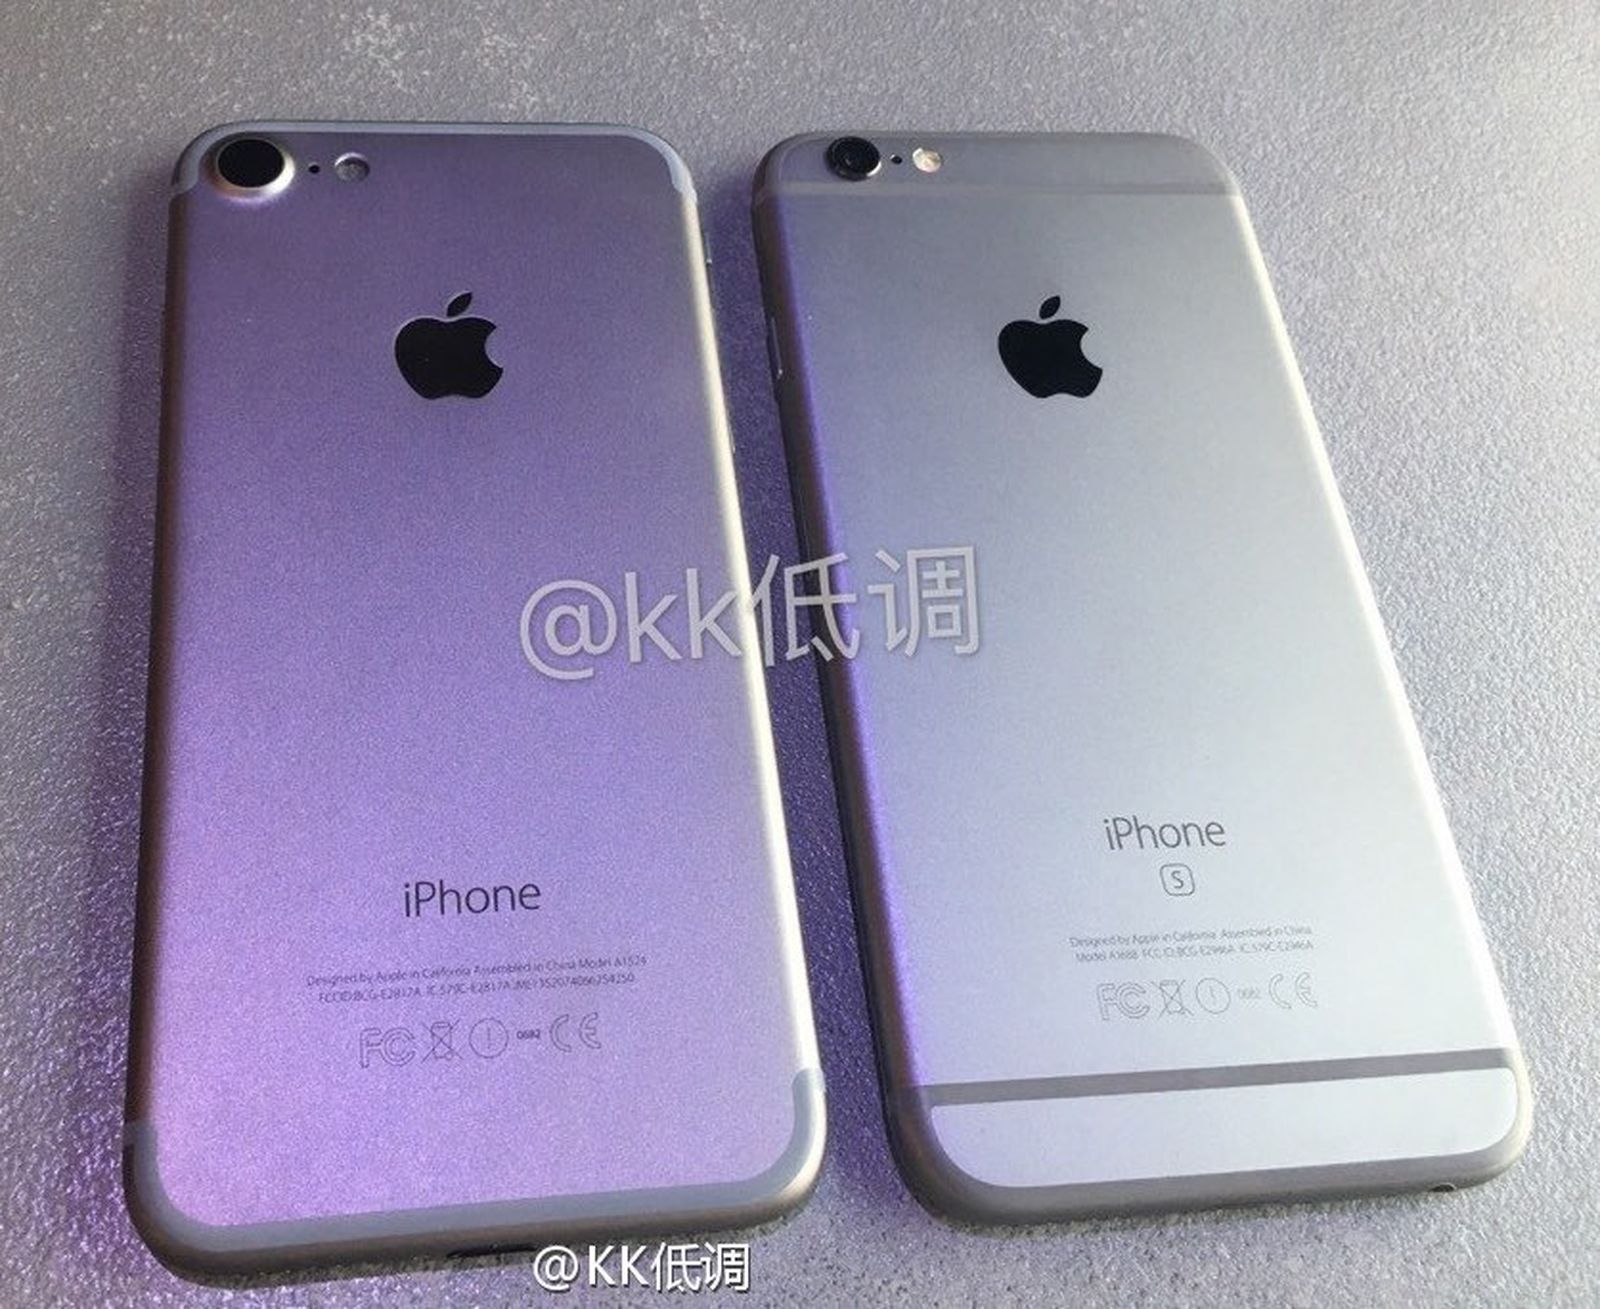 New iPhone 7 Video Offers Side-by-Side Comparison With iPhone 6s